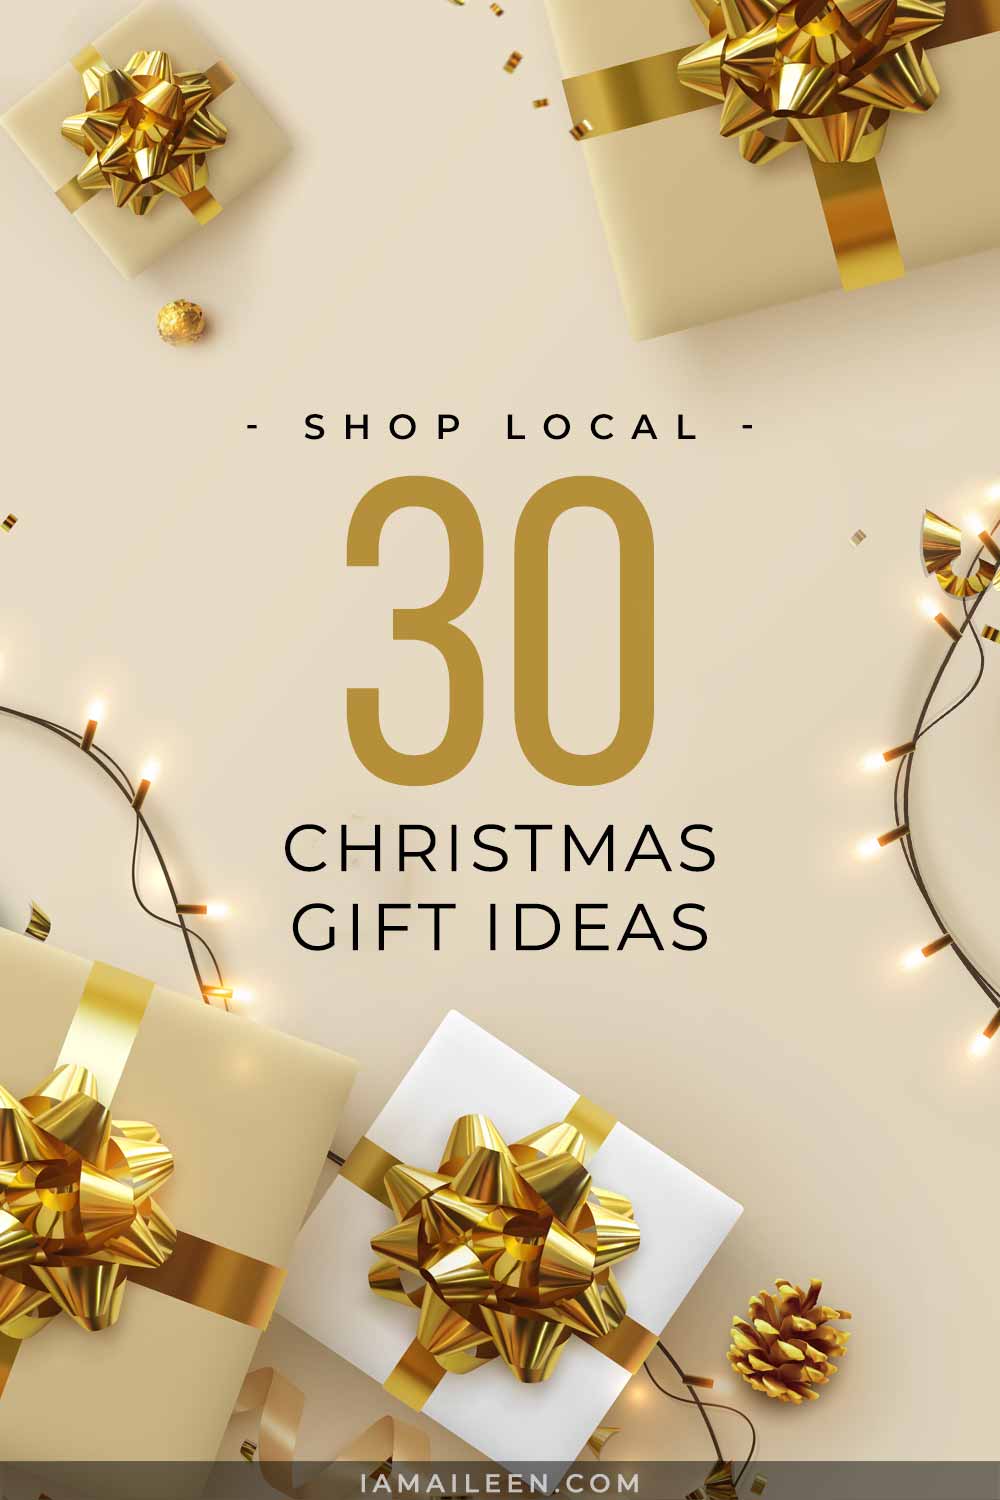 Shop Local: Top 30 Christmas Gift Ideas 2020 for Her & Him (Philippines Online Shopping Grouped by Category)